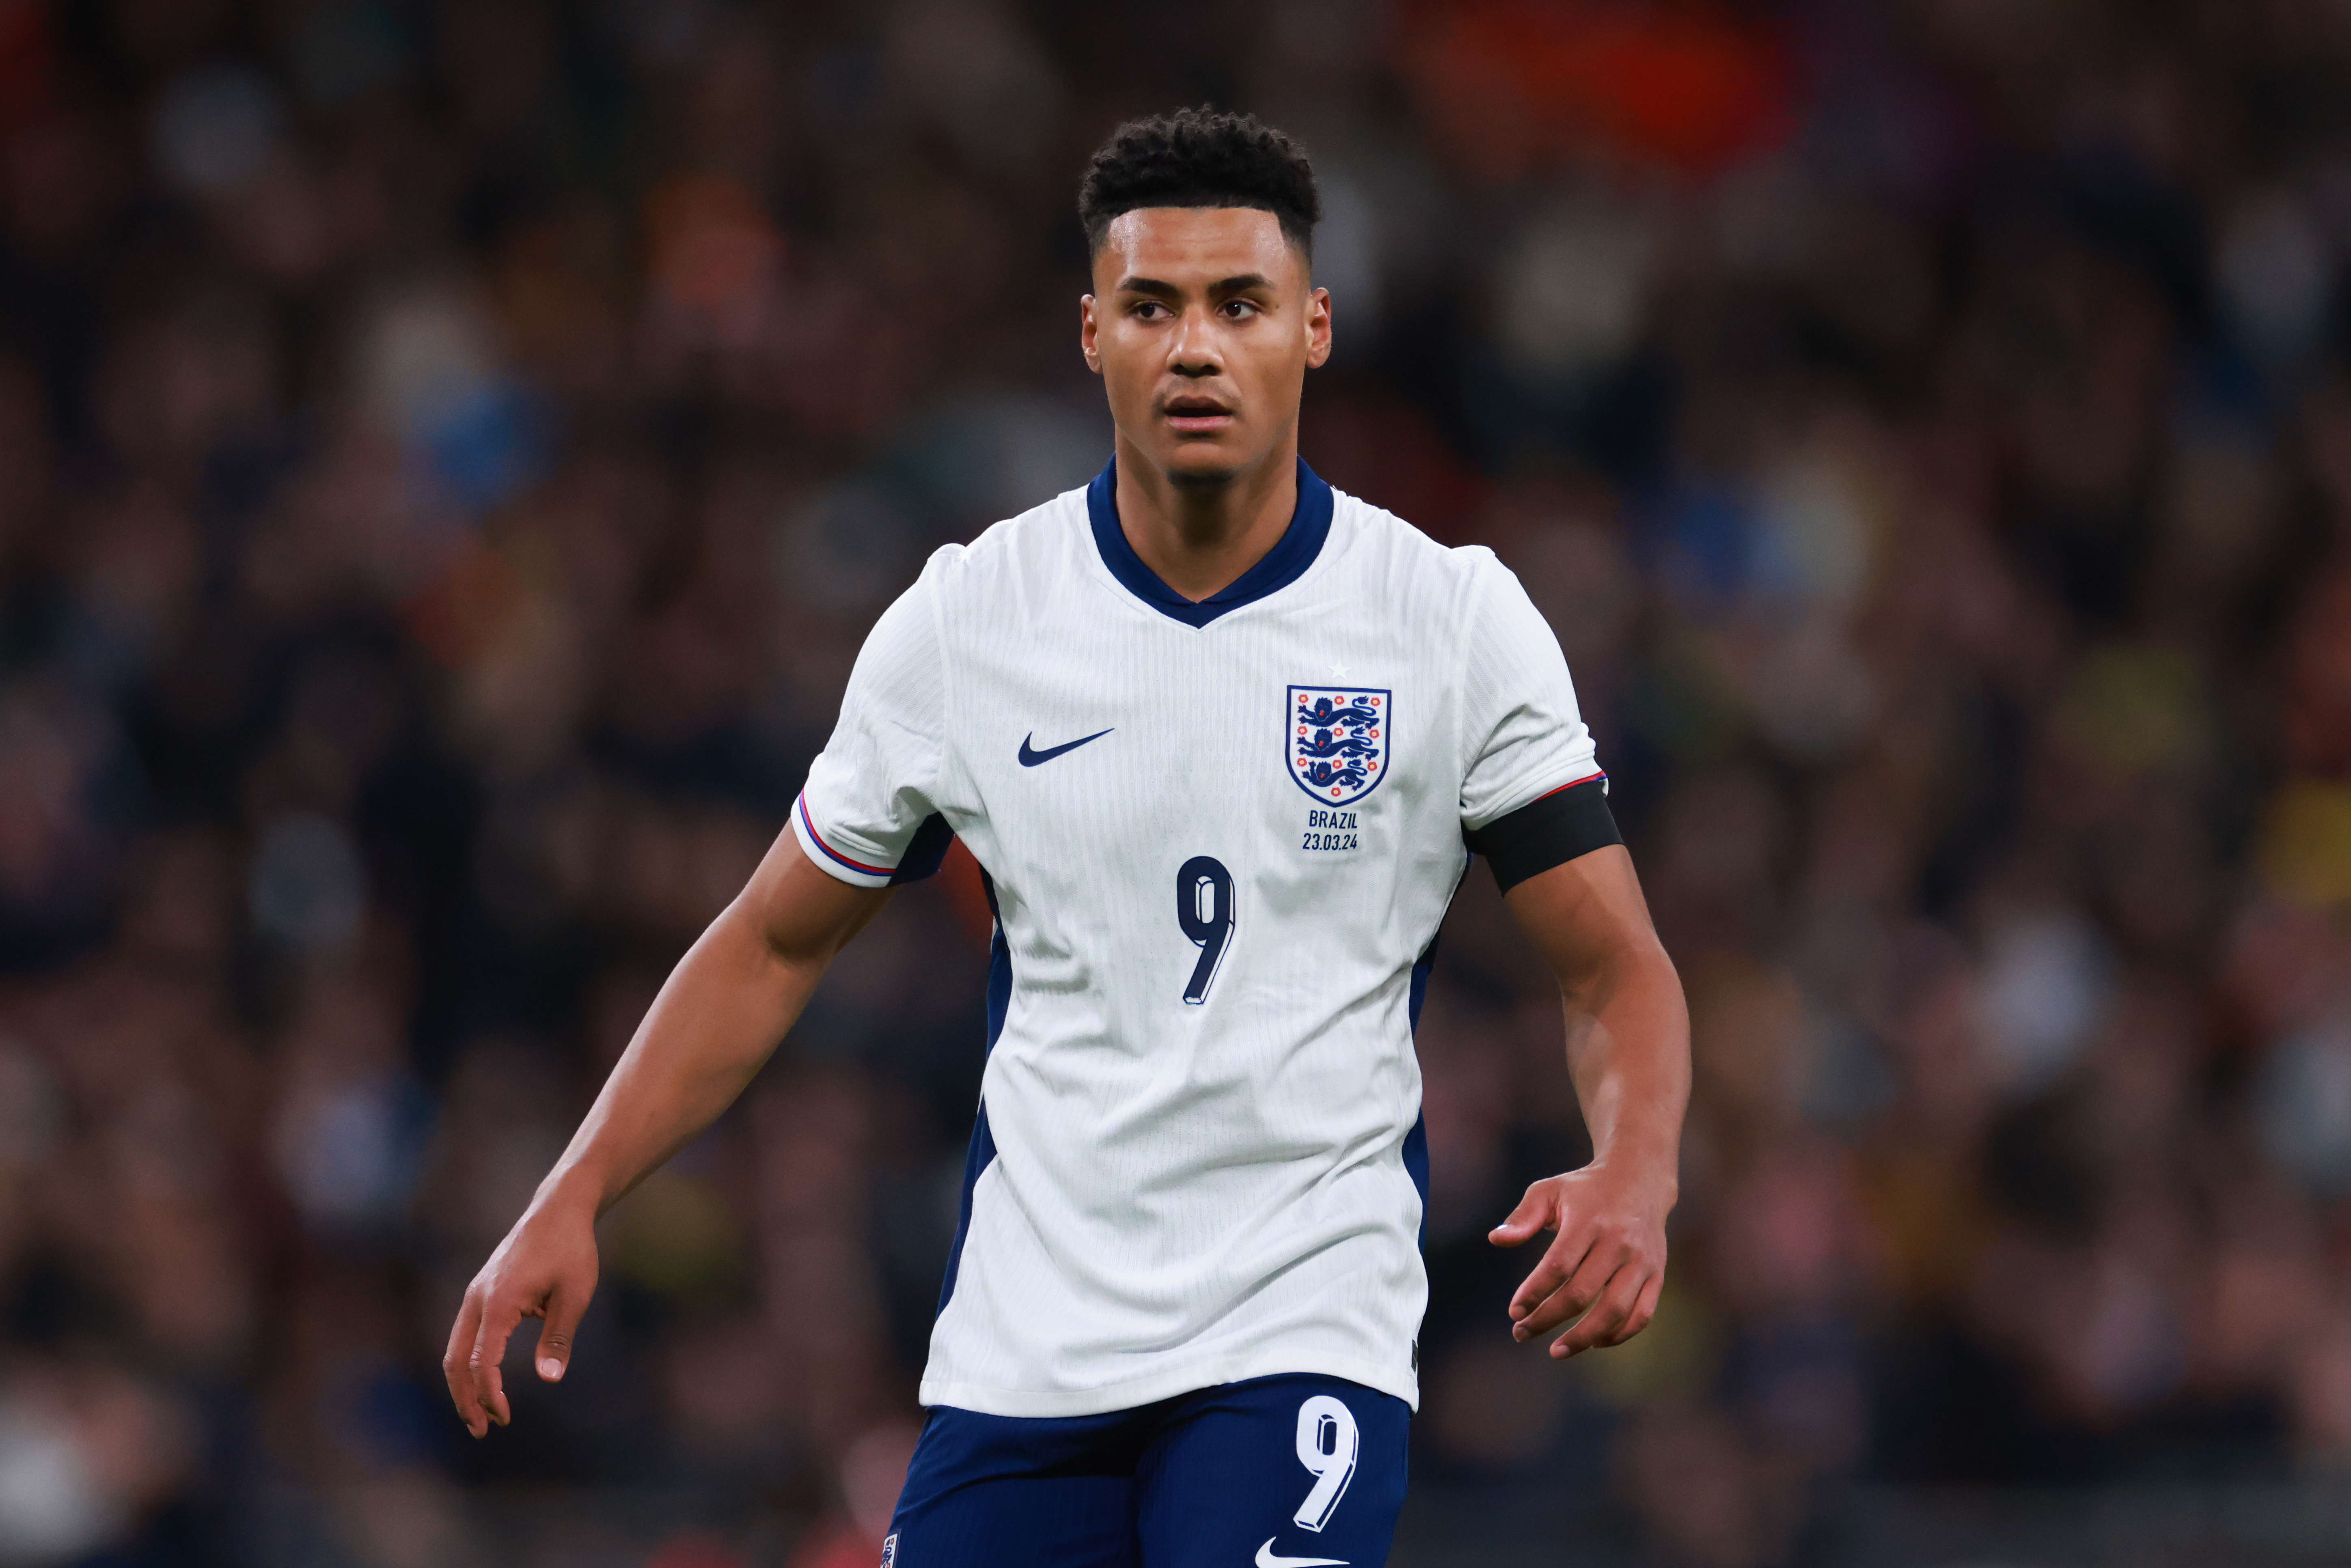 Watkins recently started for England against Brazil with Harry Kane injured